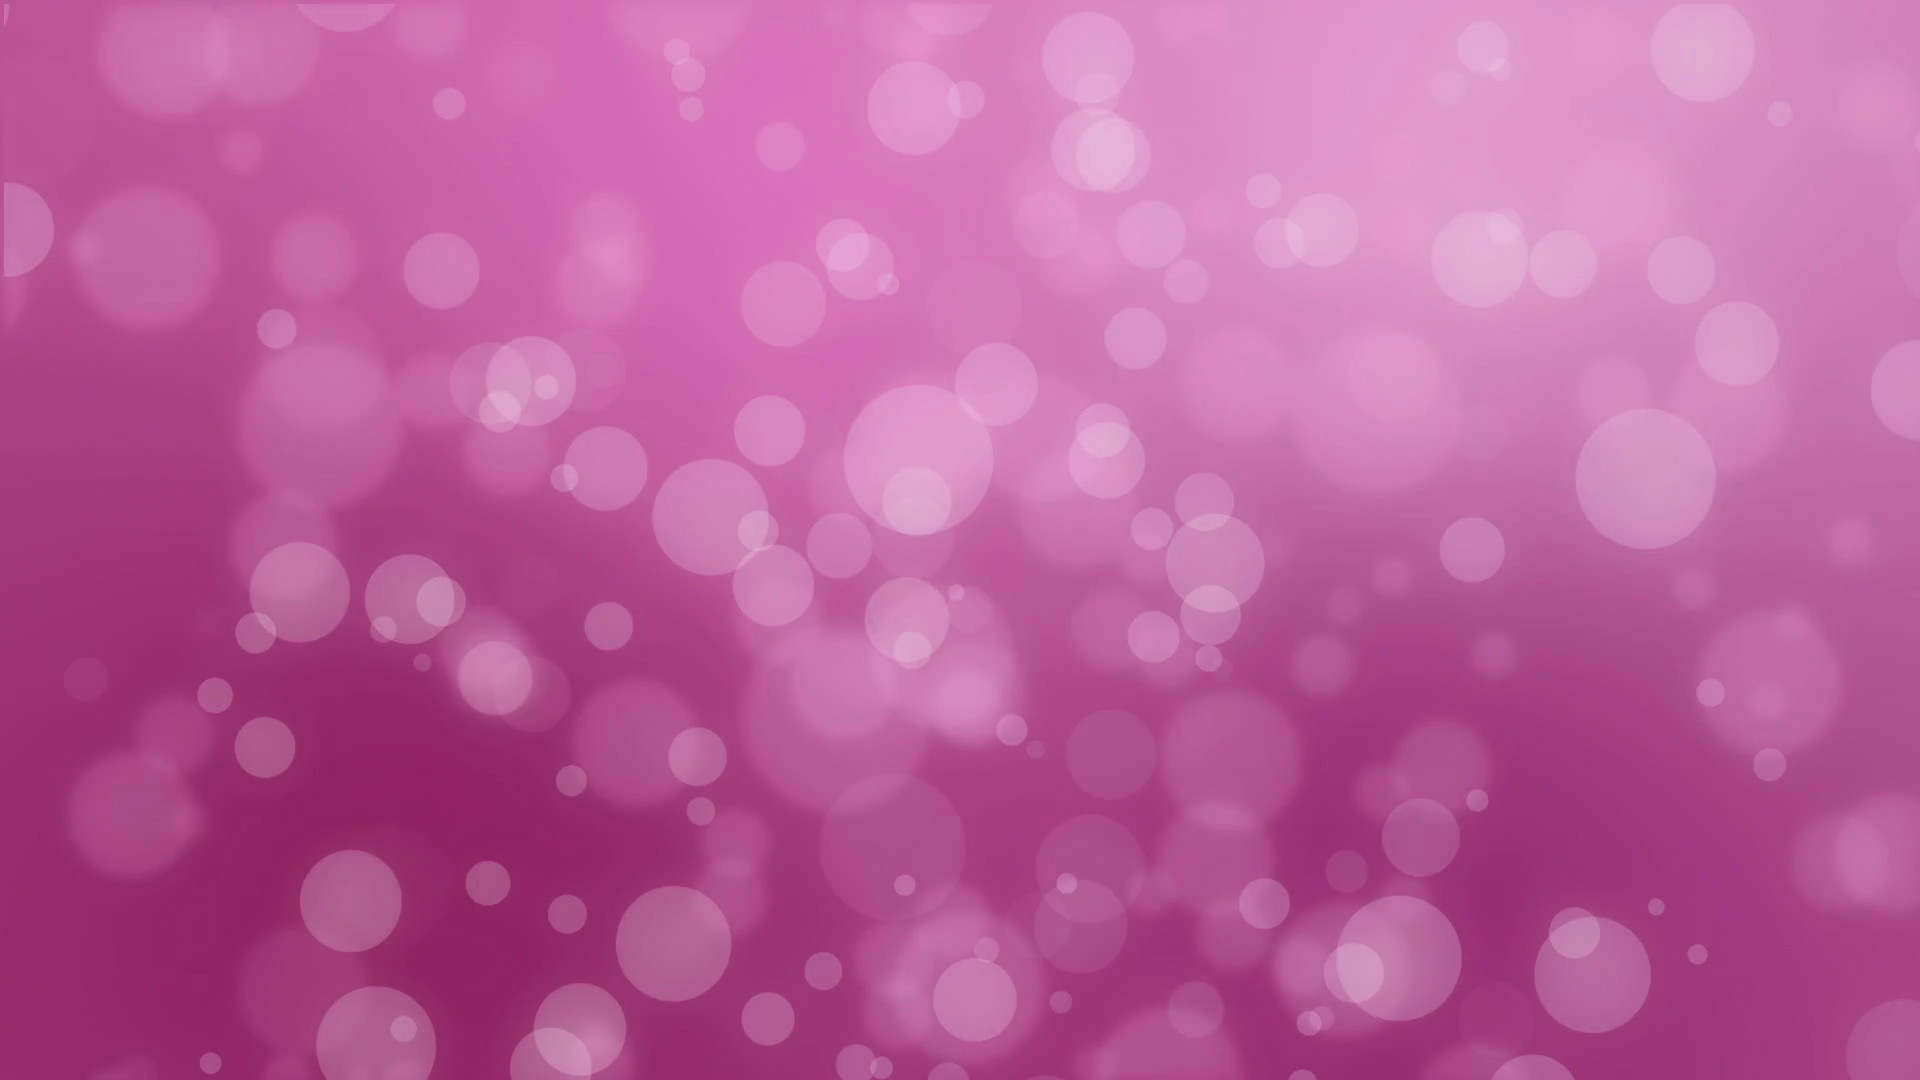 1920x1080 Bokeh holiday background with floating particles against a magenta pink  gradient backdrop Motion Background - VideoBlocks